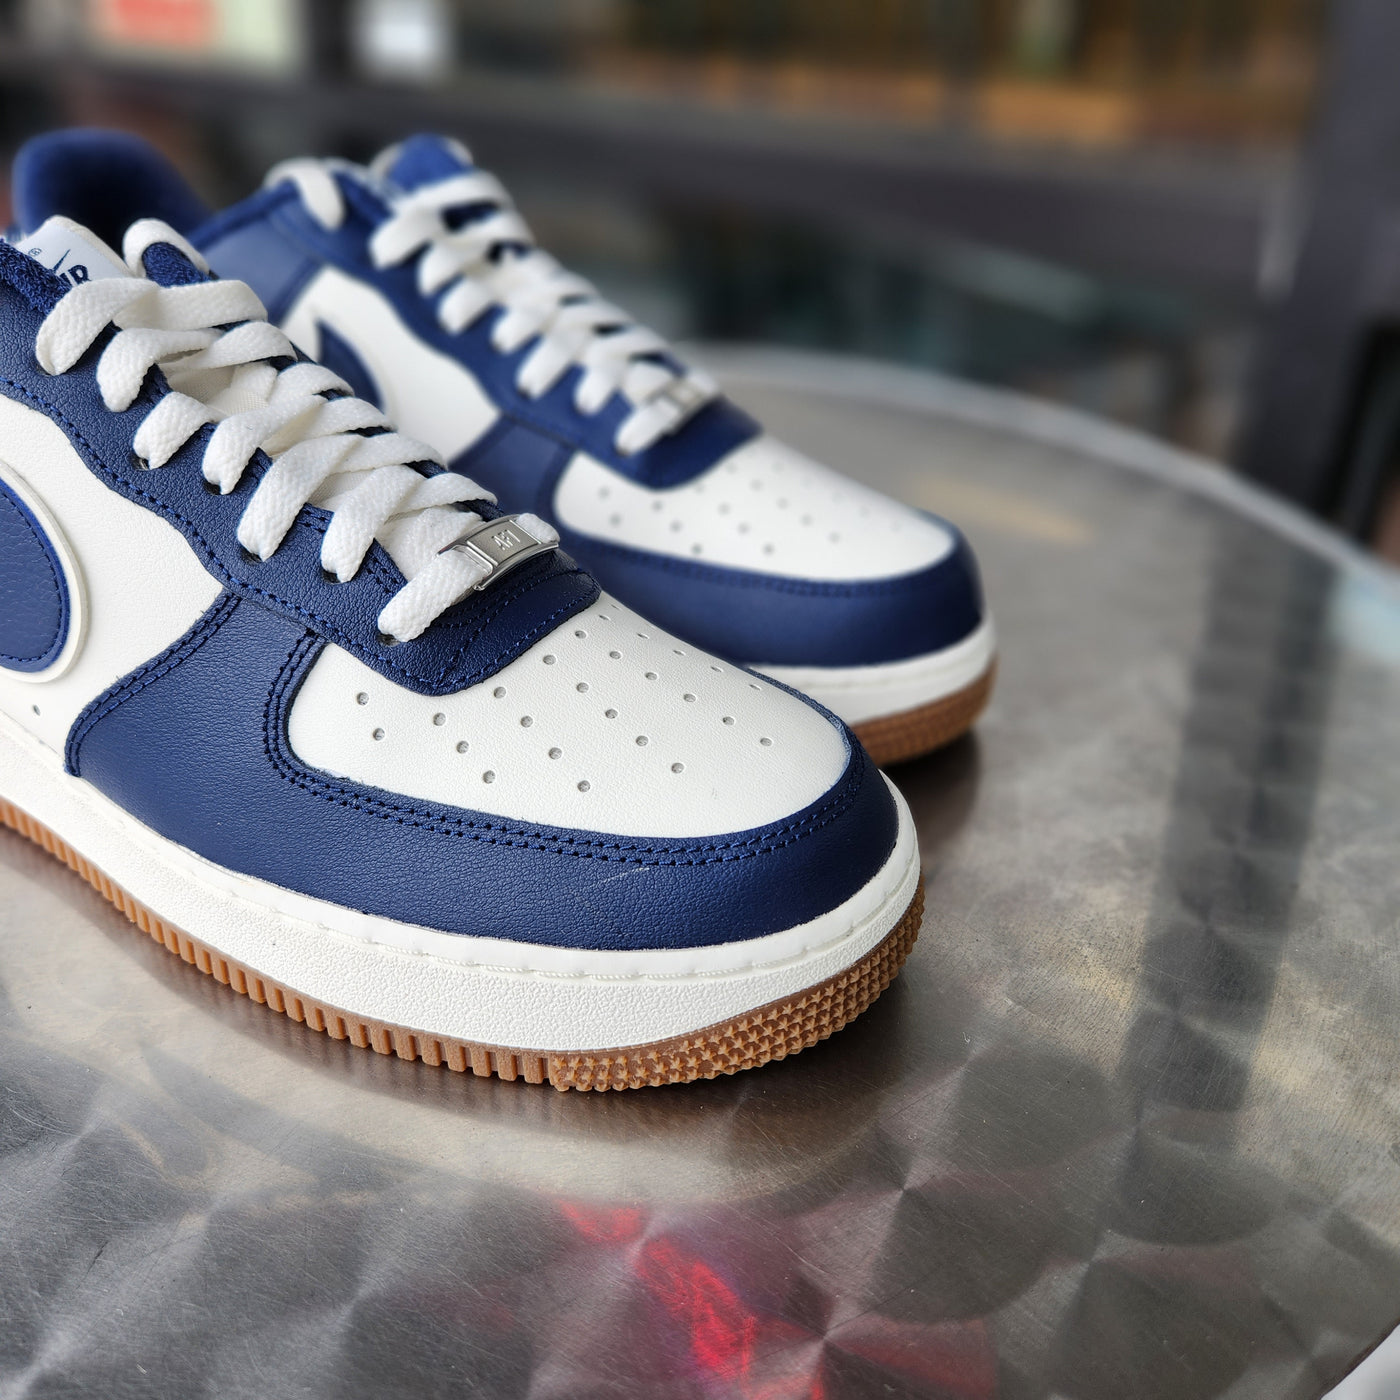 Air Force 1 LV8 Sail Navy College Pack On Foot Sneaker Review